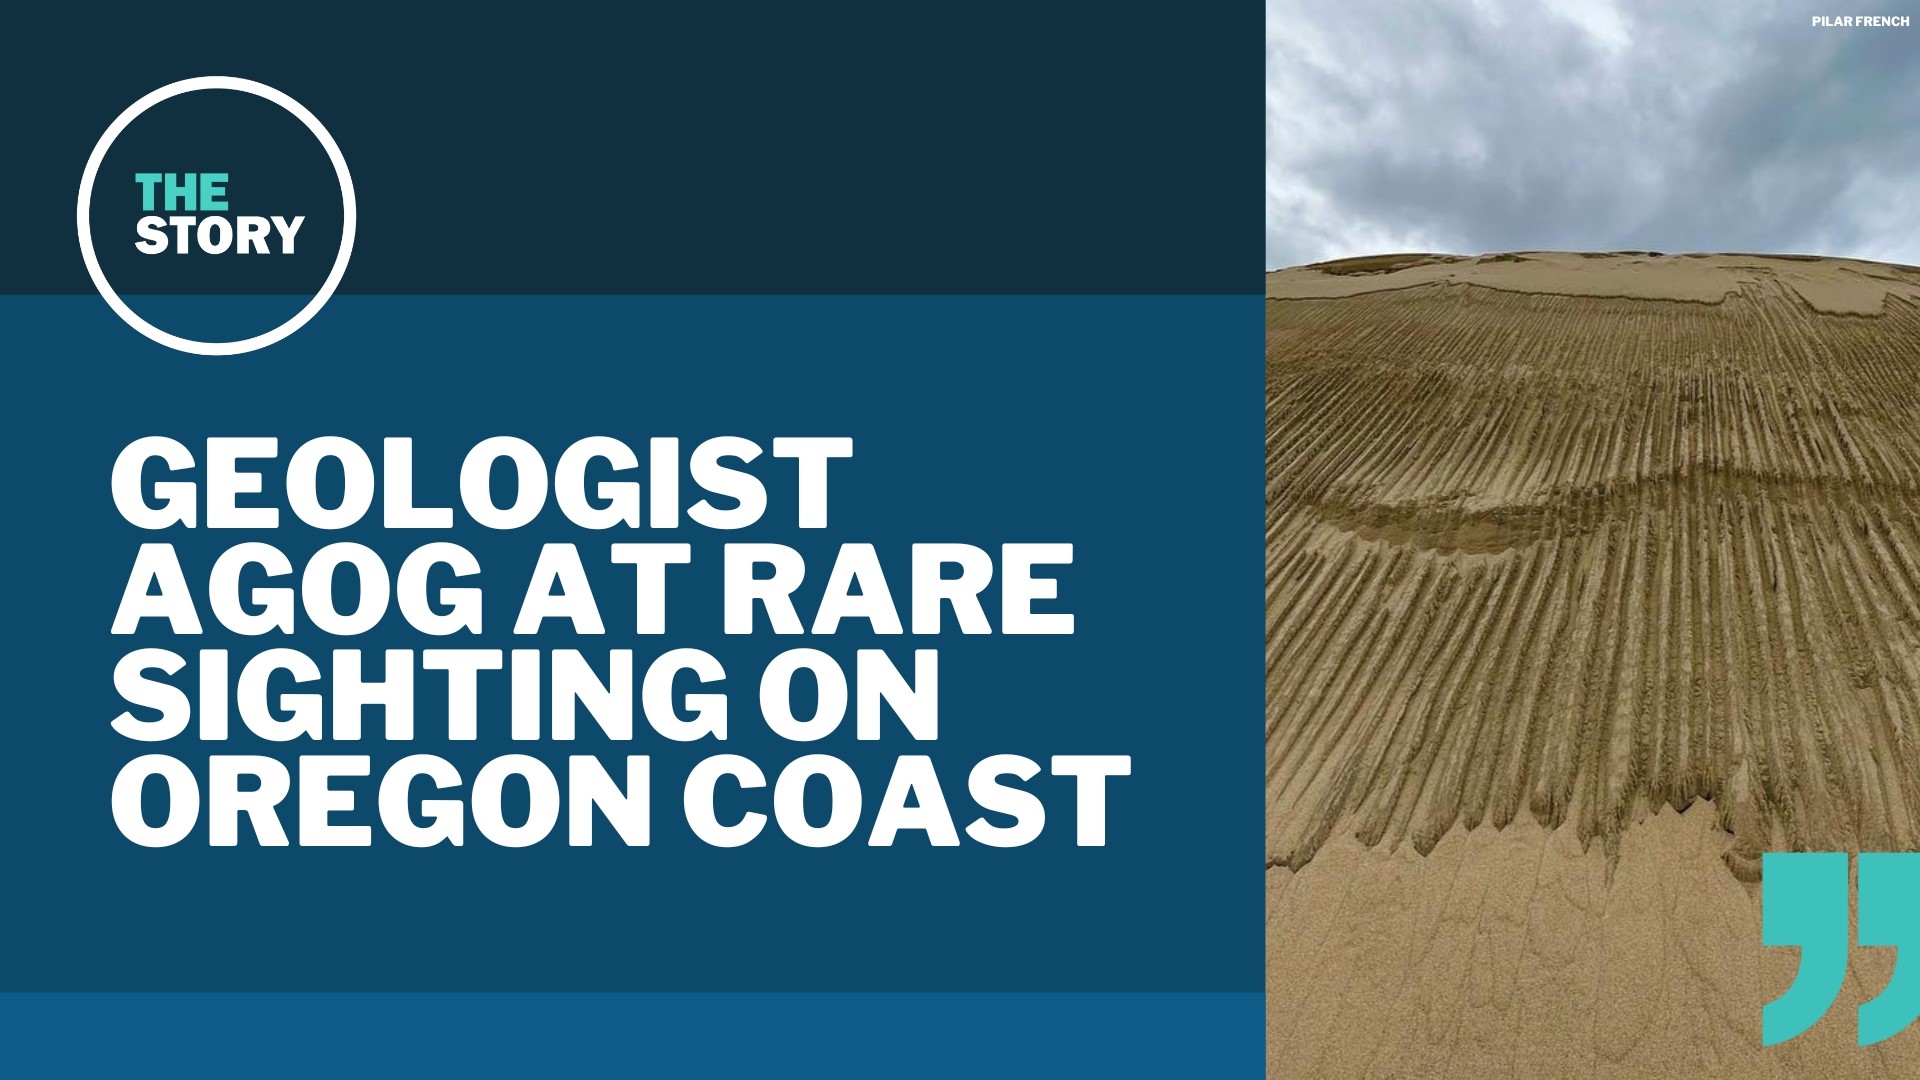 Photographs of a landform on the Oregon coast caught PSU geology professor Scott Burns off guard. They showed something he’d never seen before.